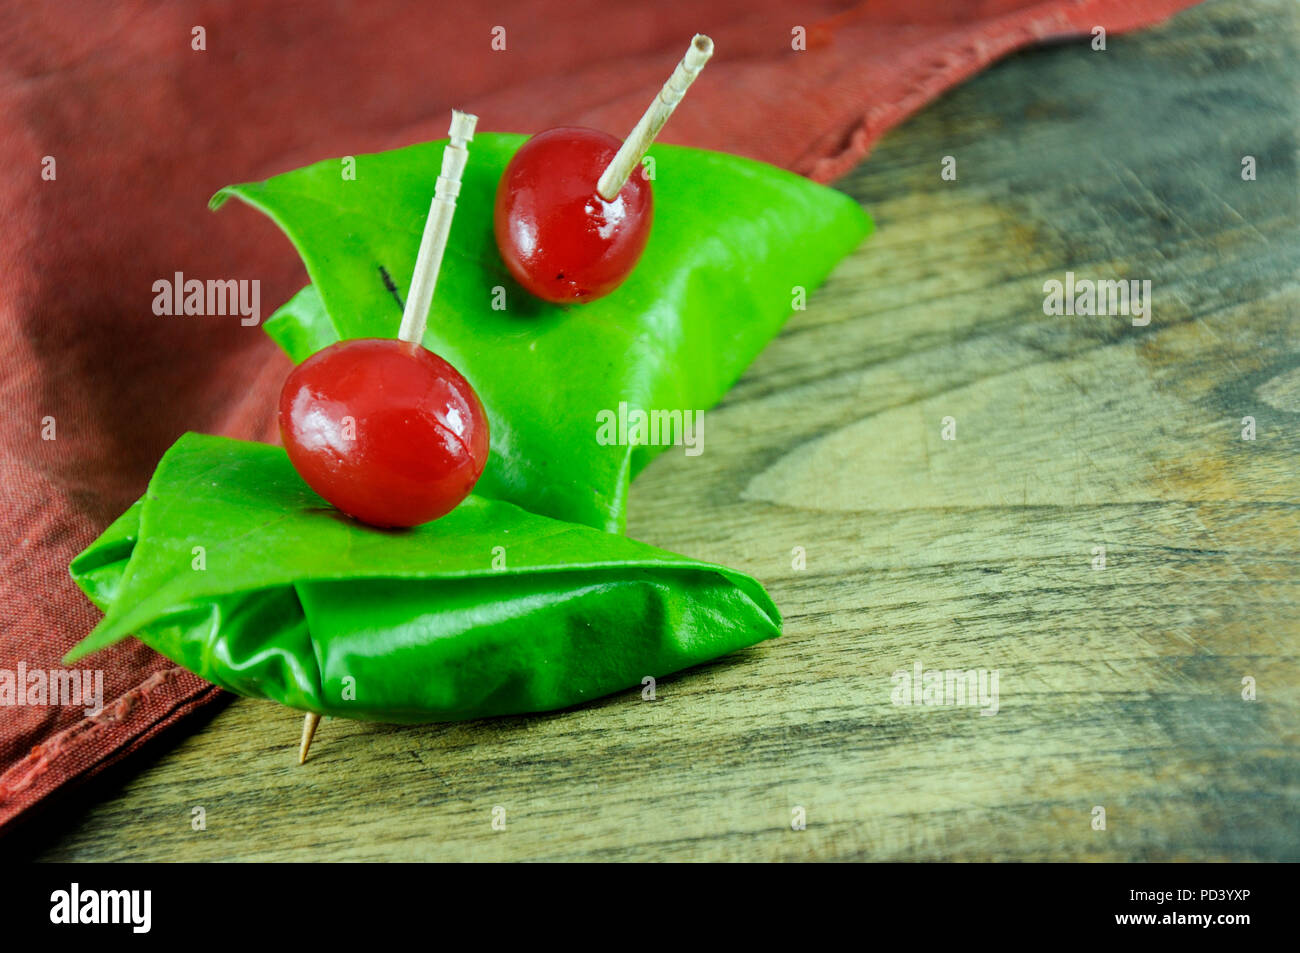 sweet paan wrapped in betel leaf, often used as an after dinner digestive. Stock Photo